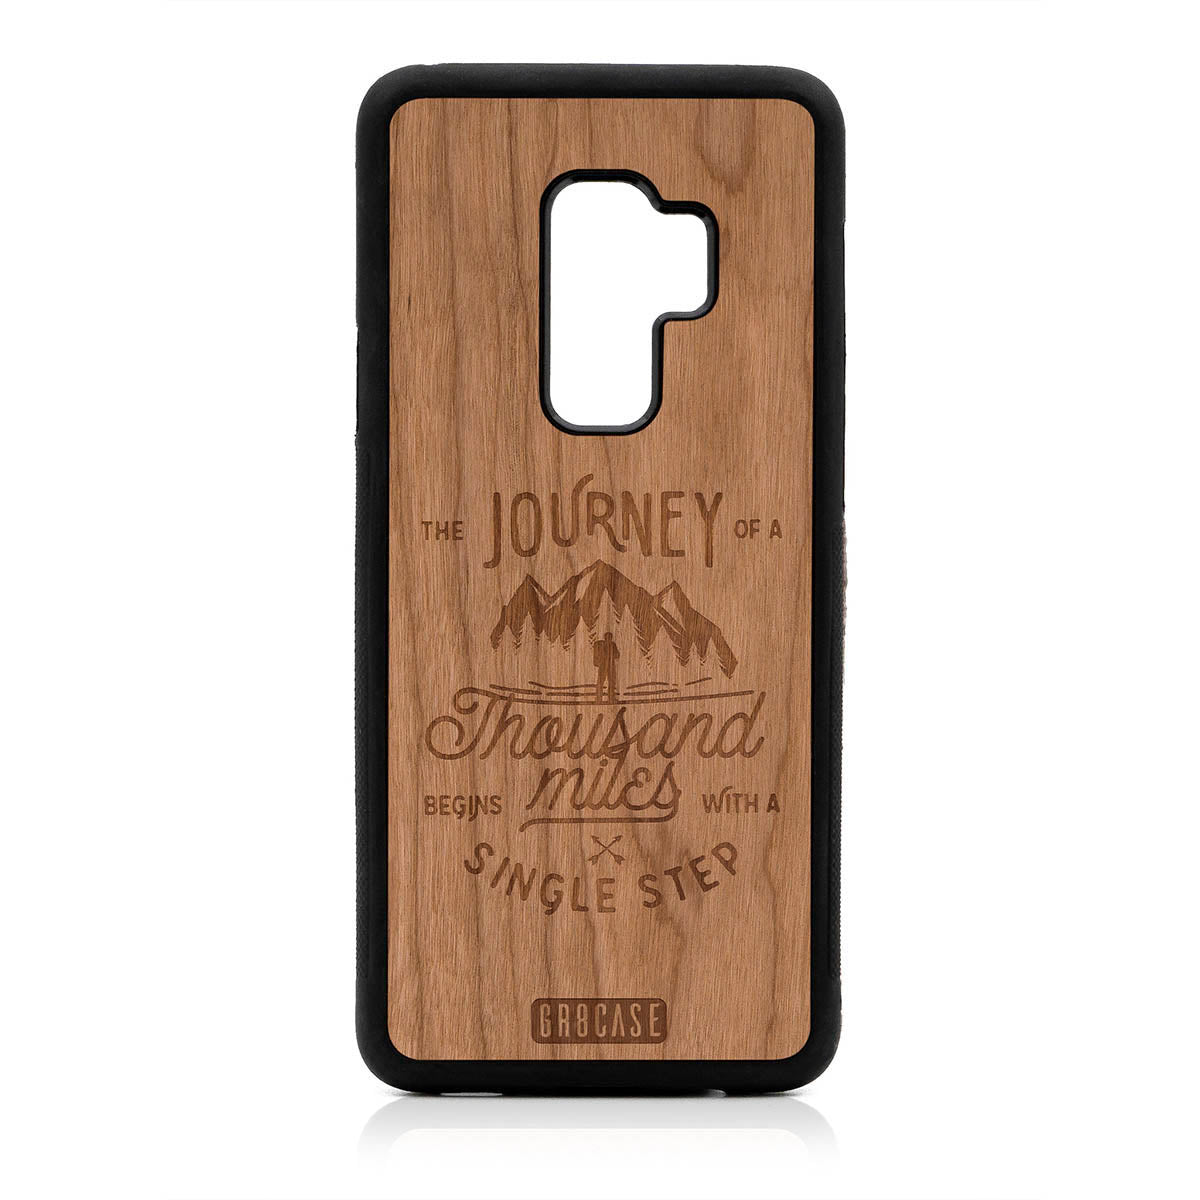 The Journey Of A Thousand Miles Begins With A Single Step Design Wood Case For Samsung Galaxy S9 Plus